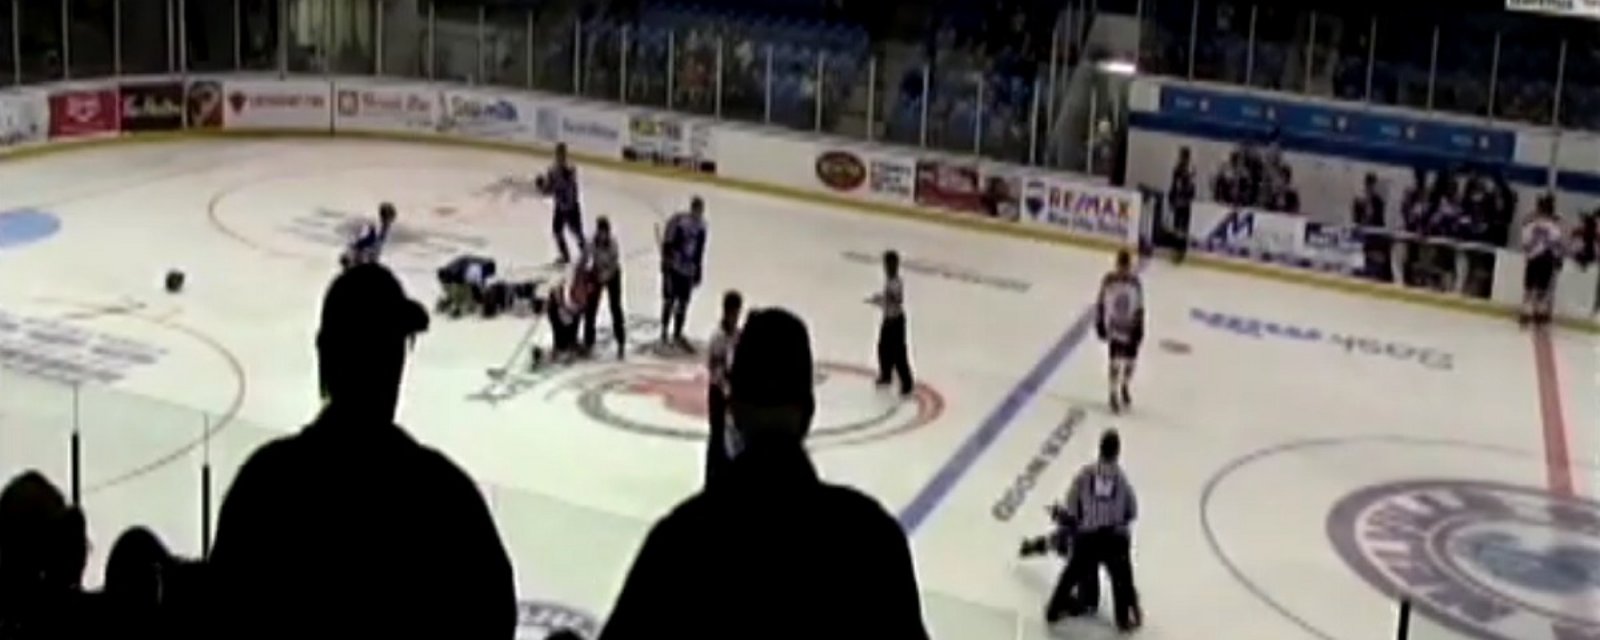 Goalie taken out by a huge hit in the SJHL.